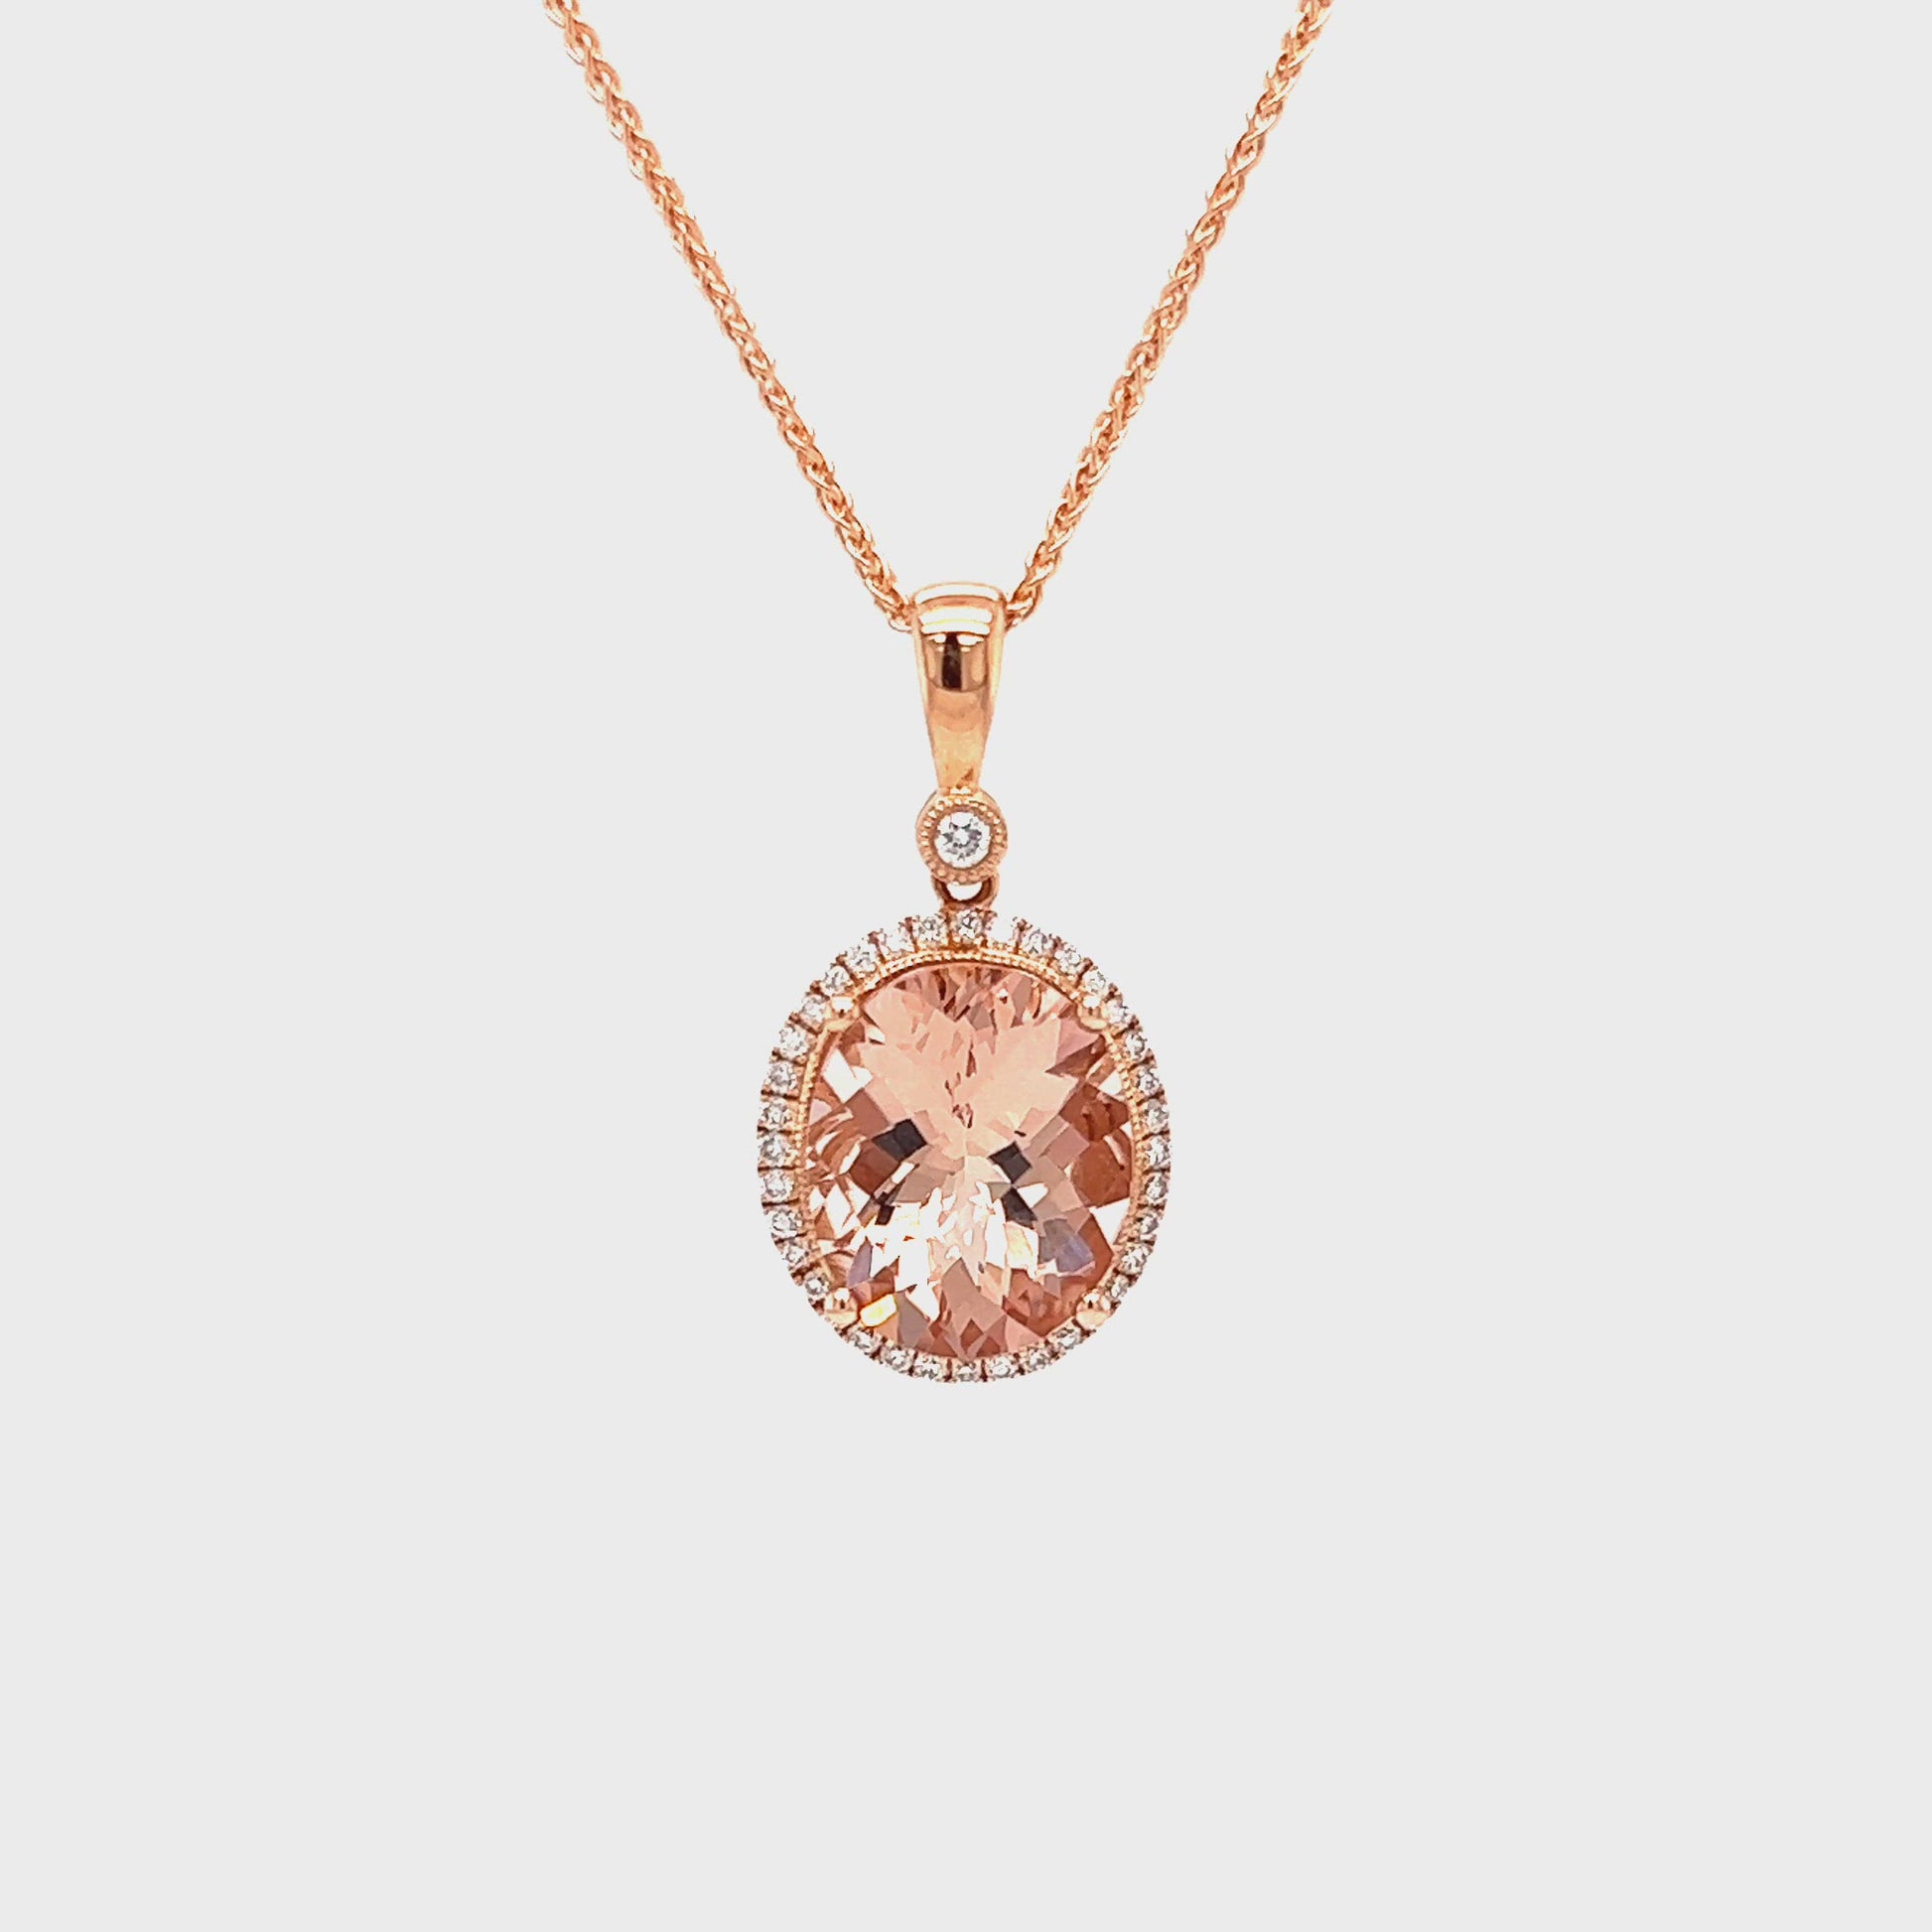 Oval Morganite Necklace with Diamond Halo in 14K Rose Gold Slow Video